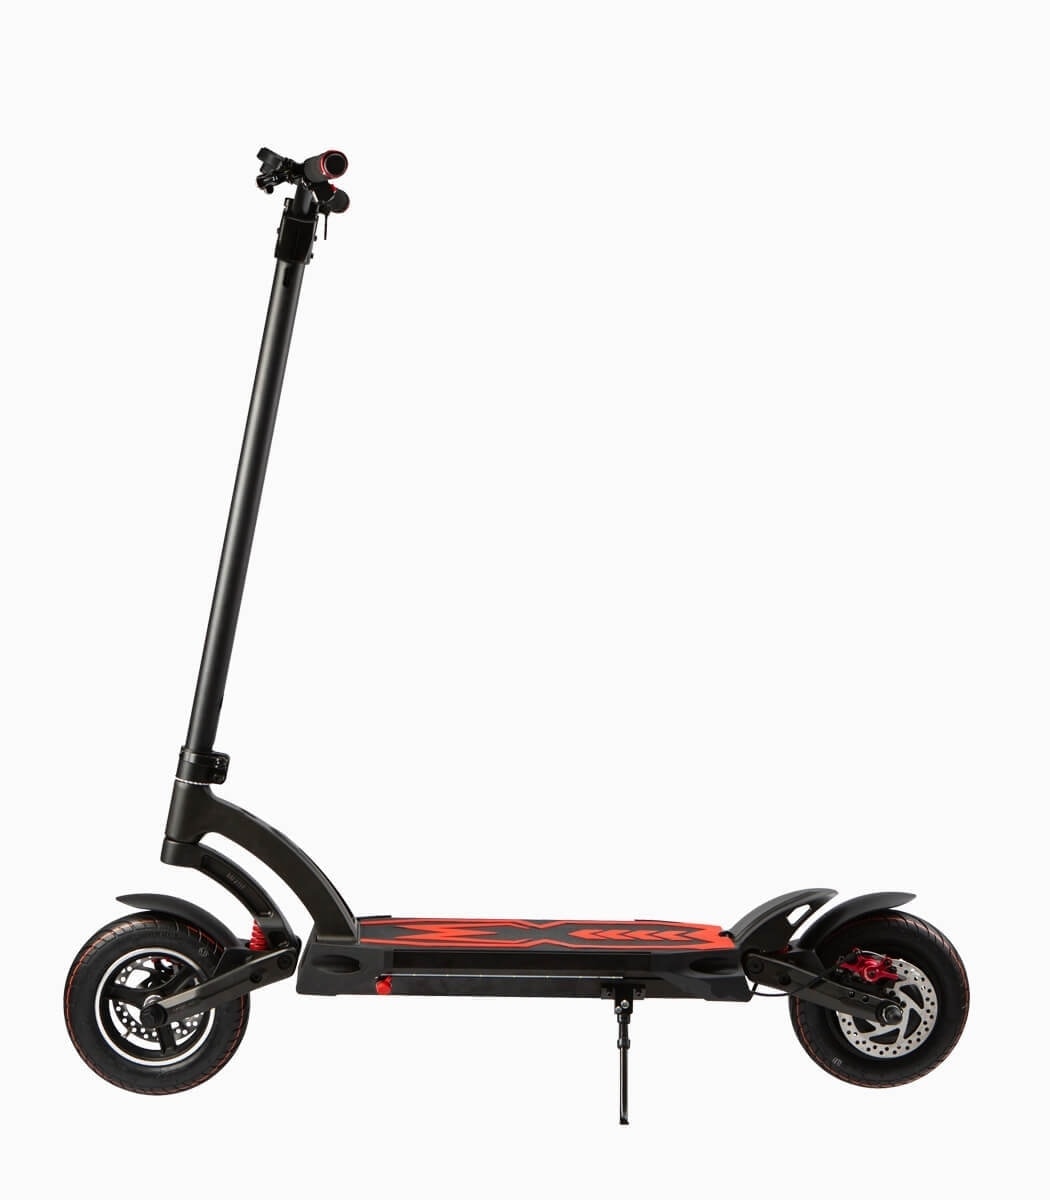 MOBOT MANTIS (RED10AH) UL2272 certified high performance electric scooter left